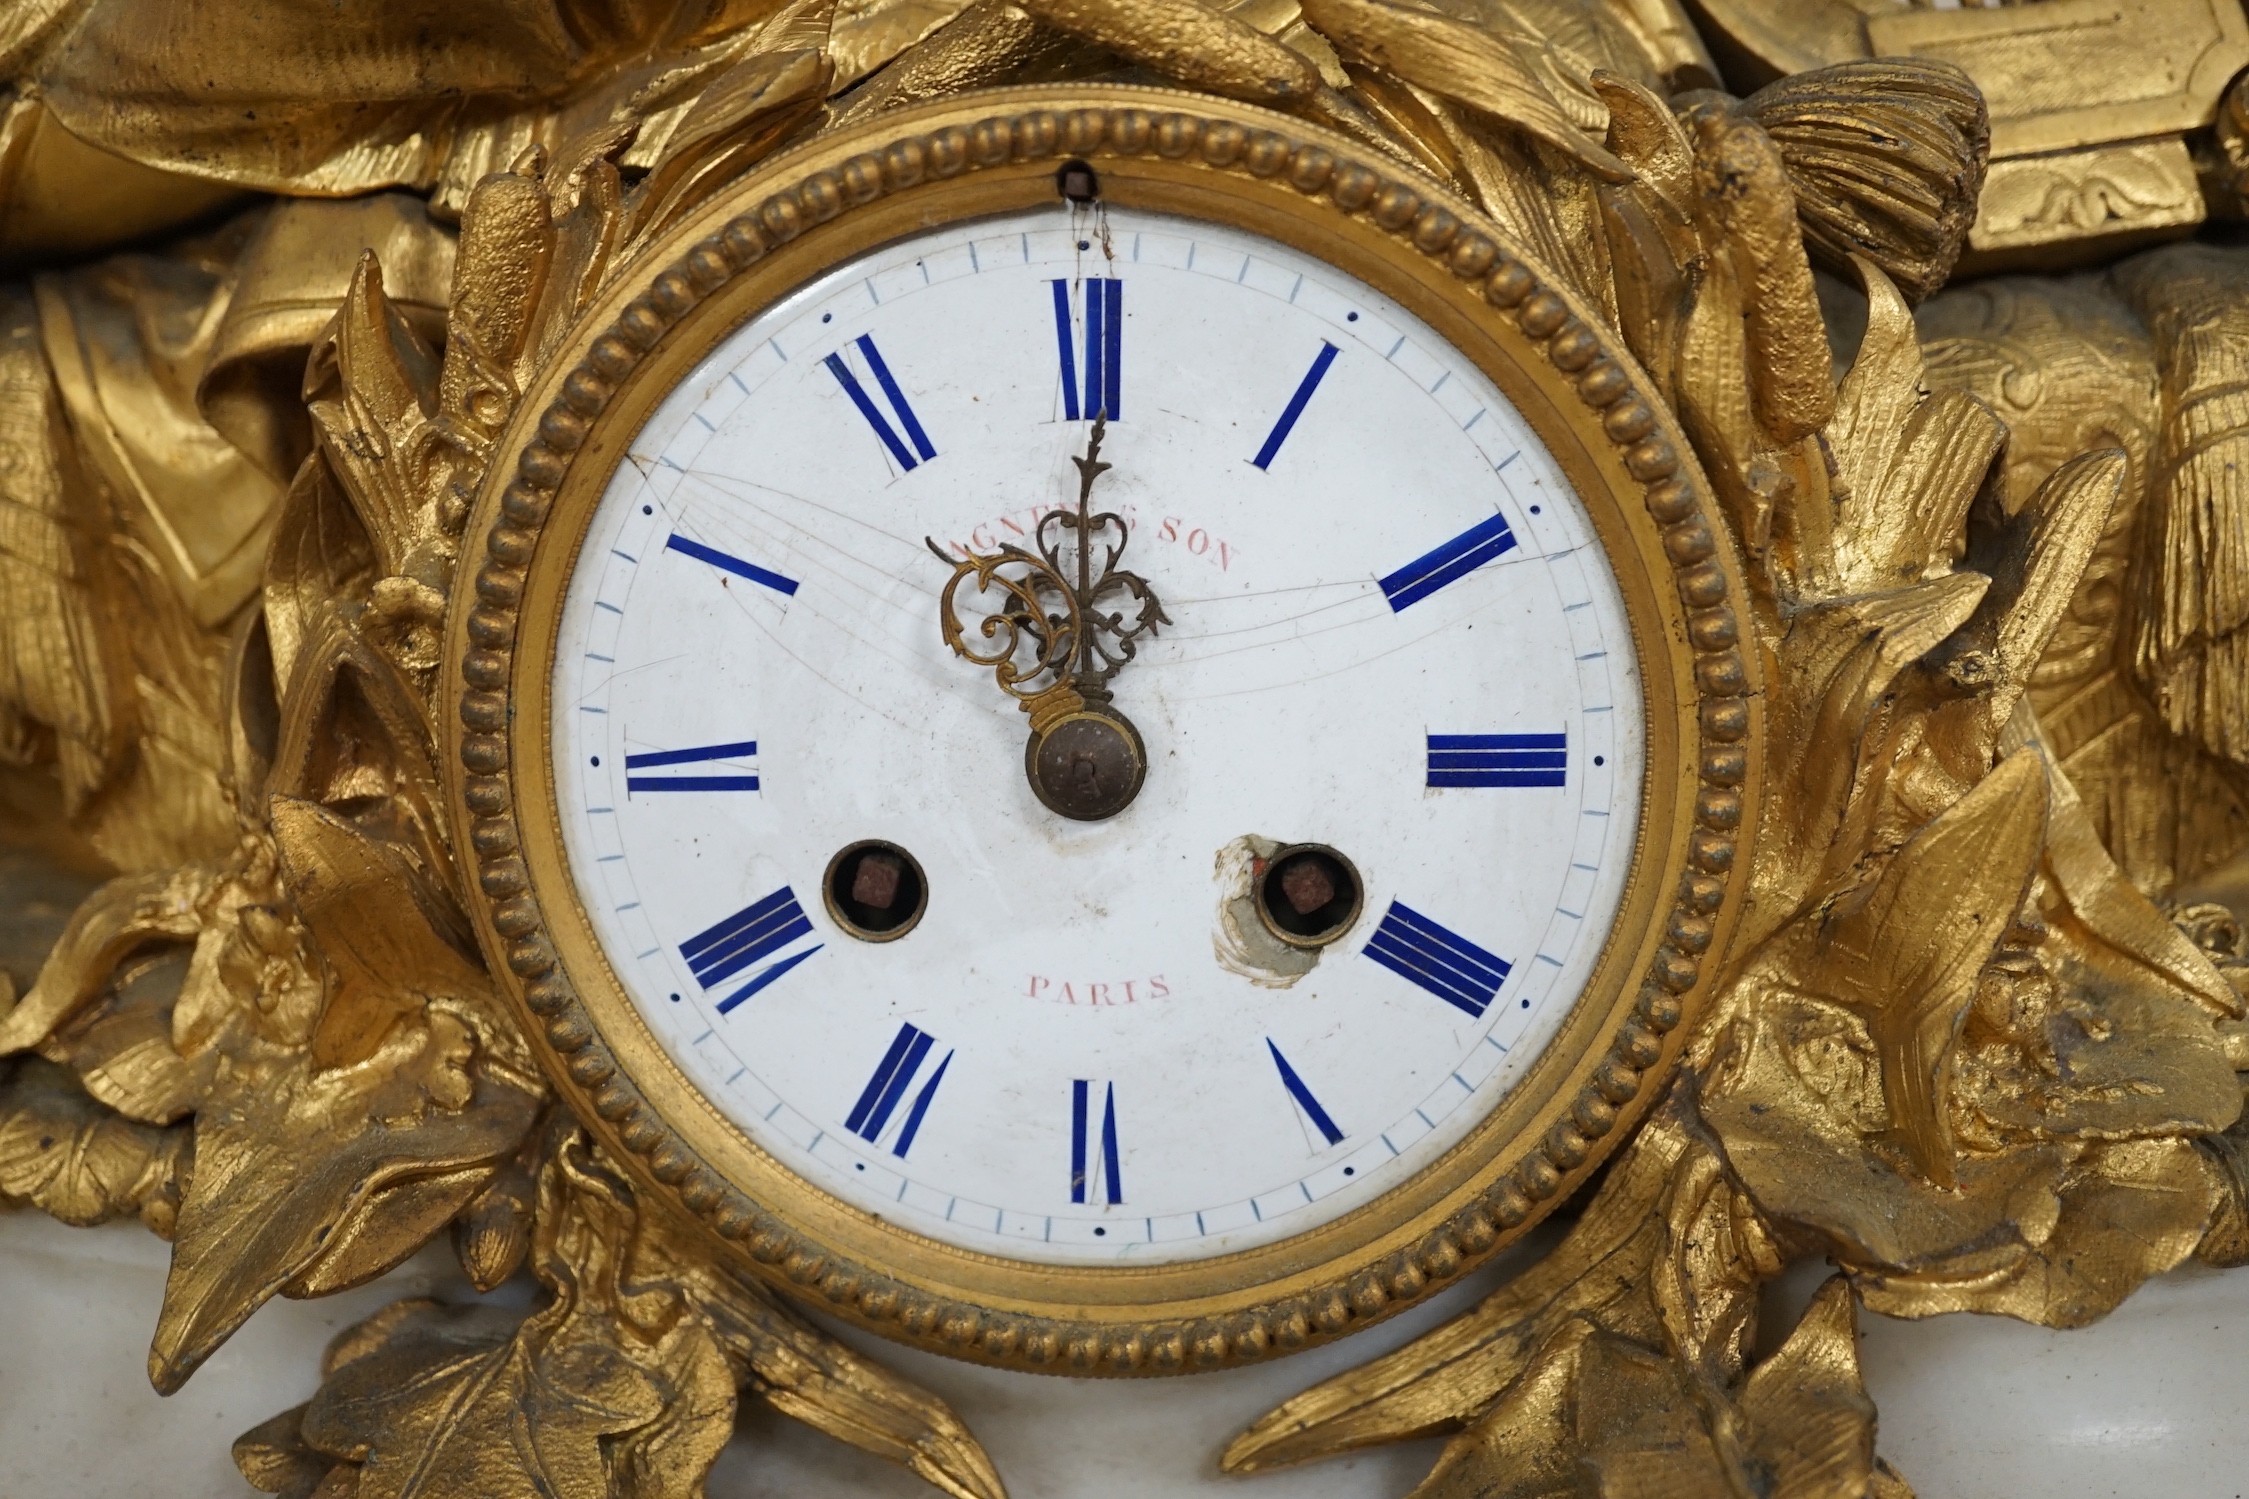 A 19th century French neoclassical revival figural ormolu and white marble clock, 39cm tall